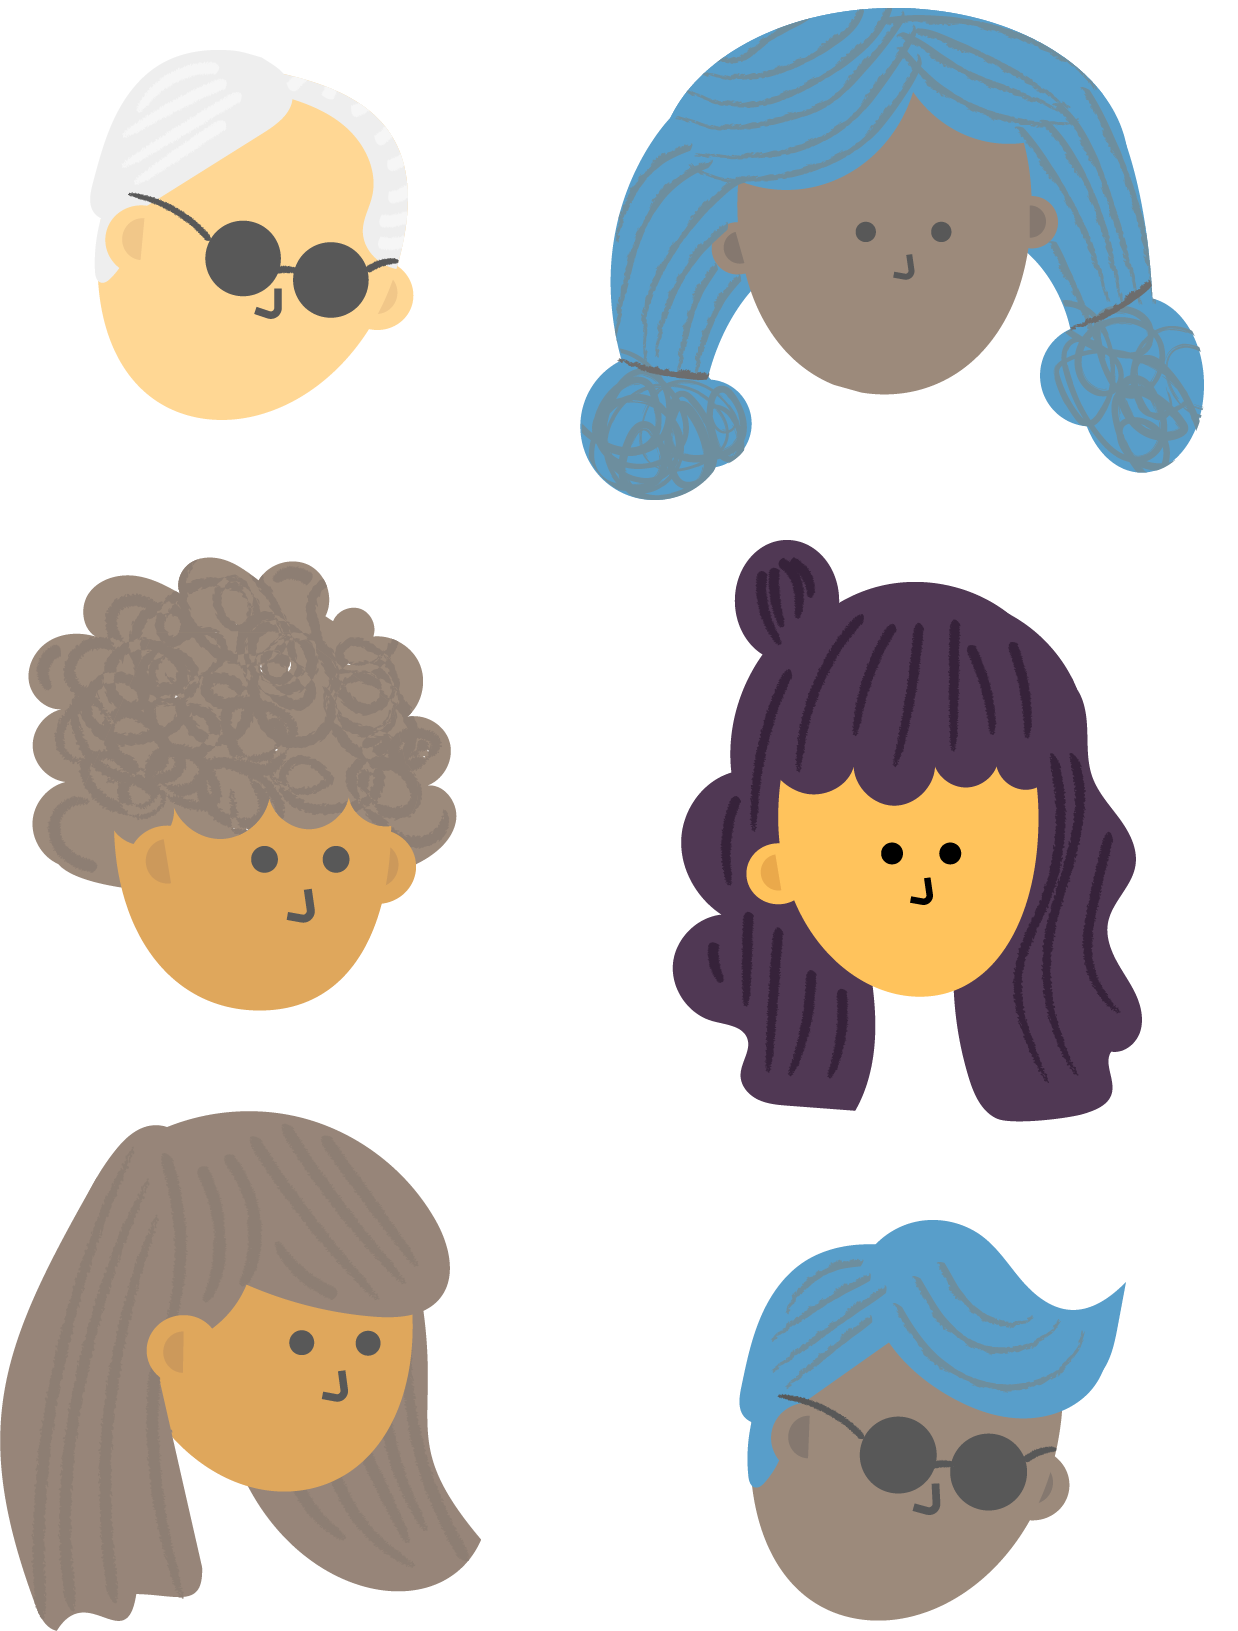 An illustration of a Six human heads, one with short gray hair and sunglasses, one with blue hair in pigtails, one with curly hair, one with long purple hair, one with brown hair, and one with wavy blue hair